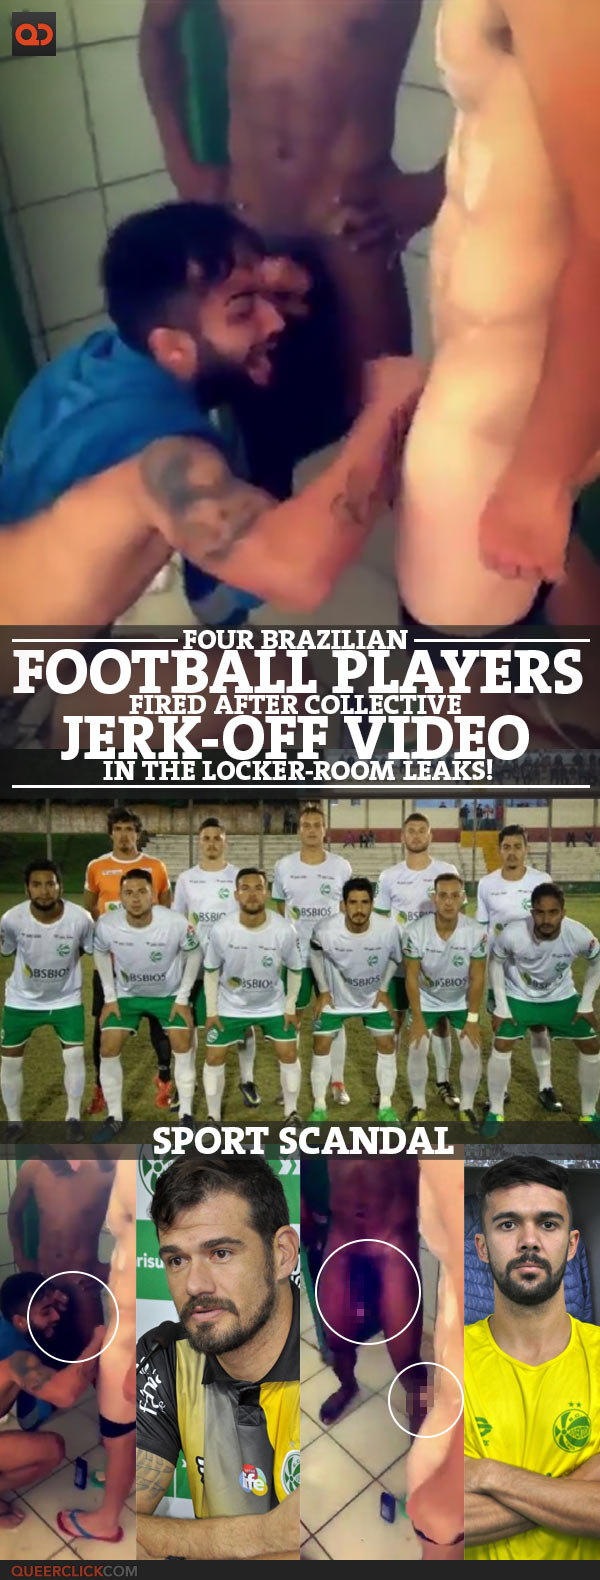 Four Brazilian Football Players Fired After Collective Jerk-Off Video In The Locker Room Leaks! image